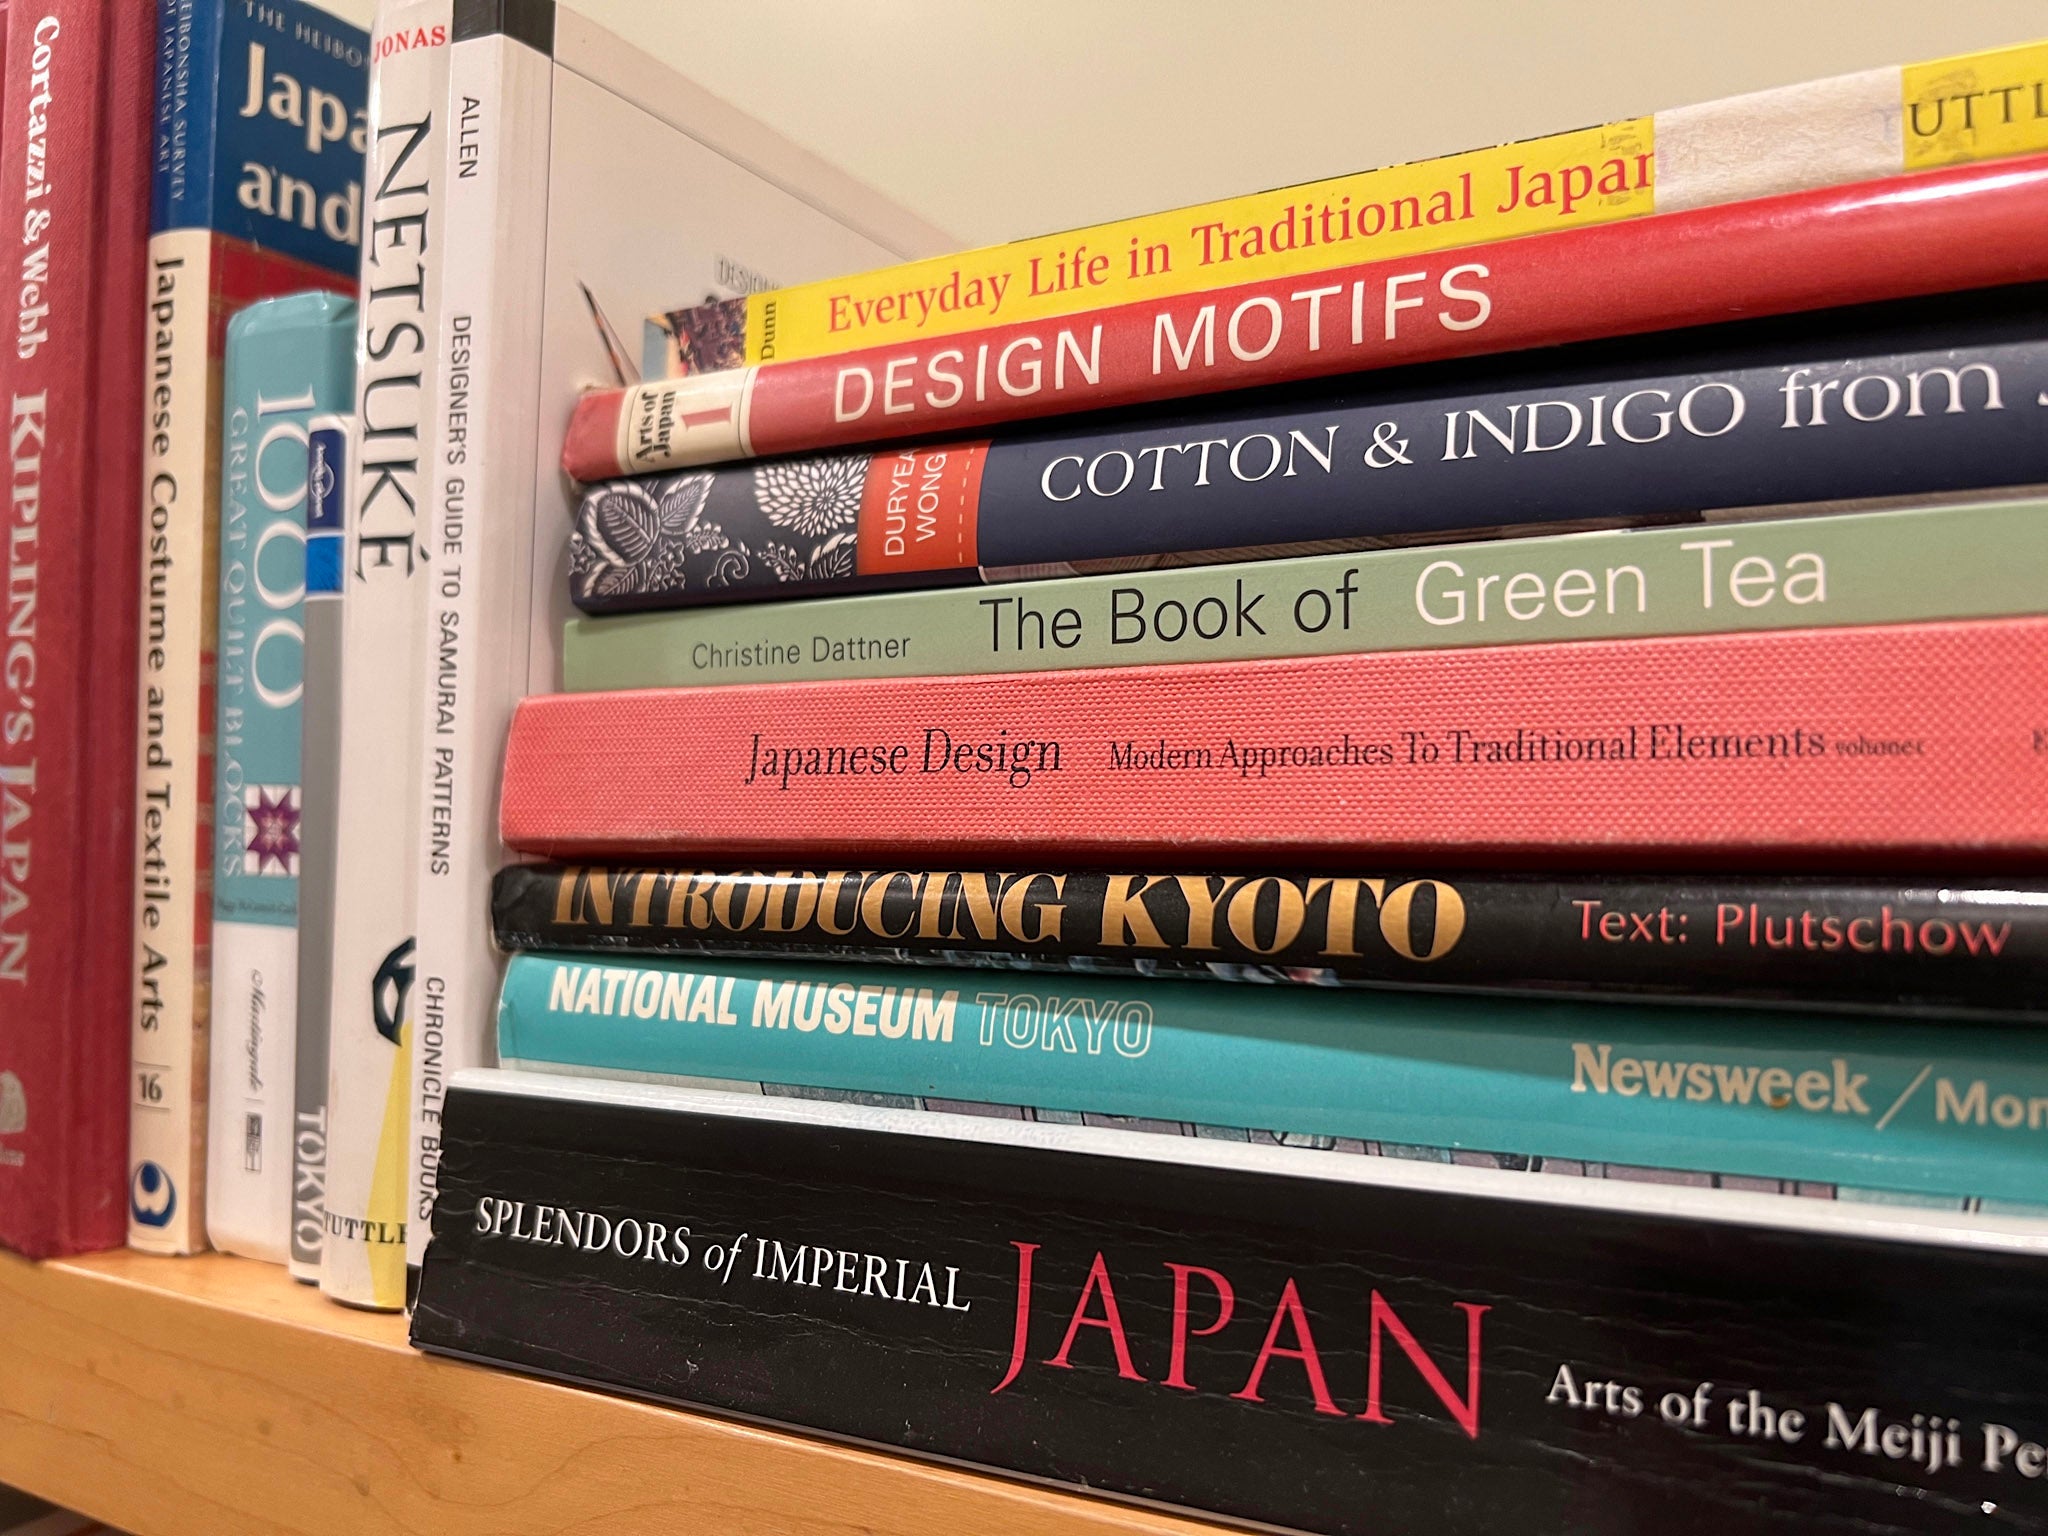 Patricia Belyea’s library of books on Japan